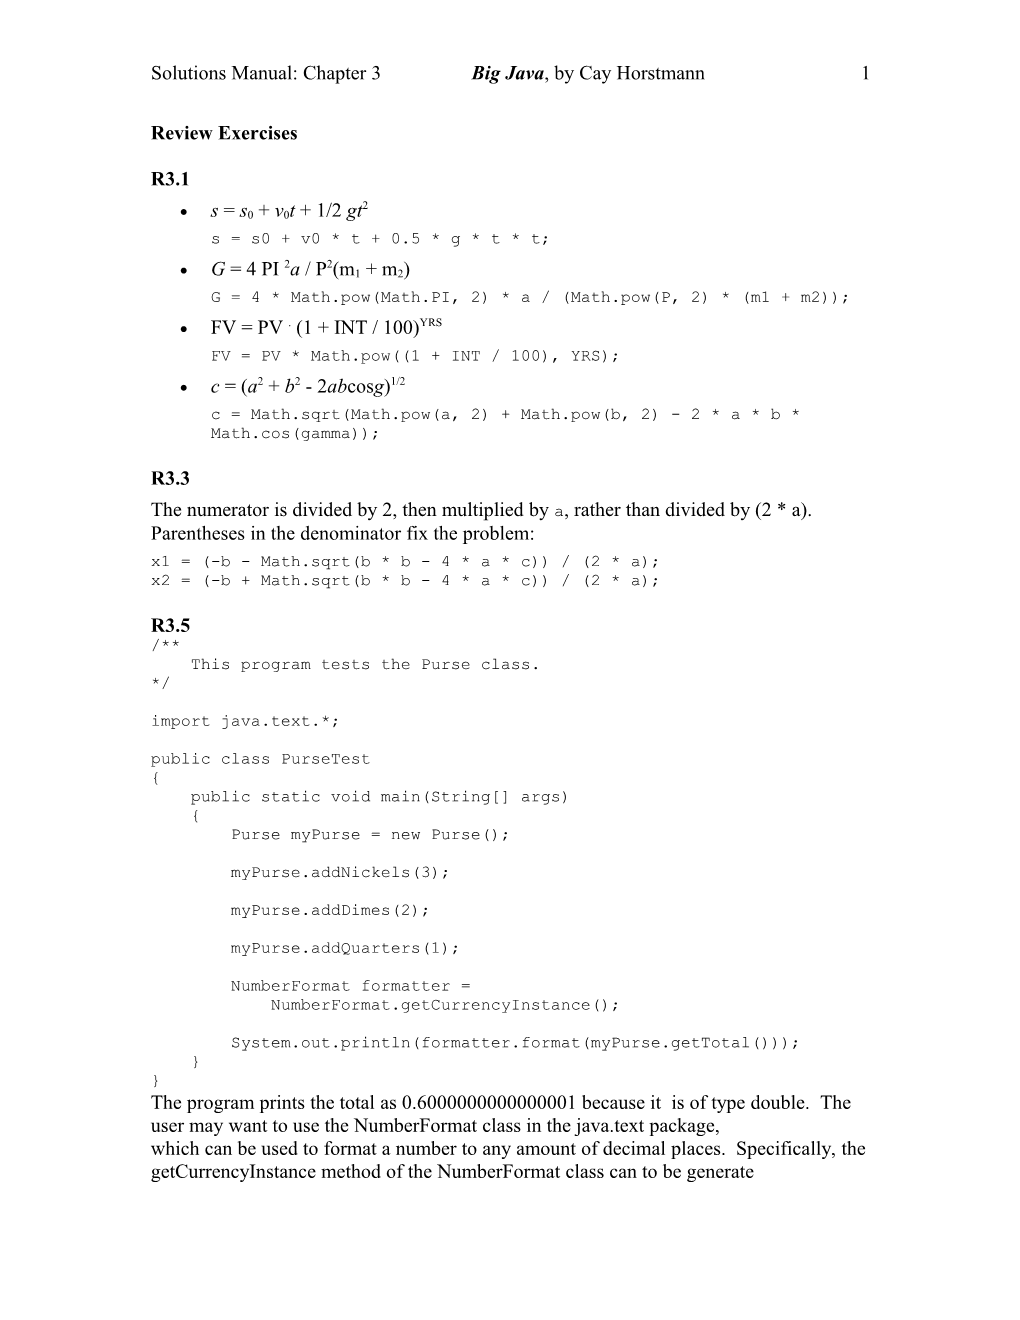 Solutions Manual: Chapter 3 Big Java, by Cay Horstmann 19